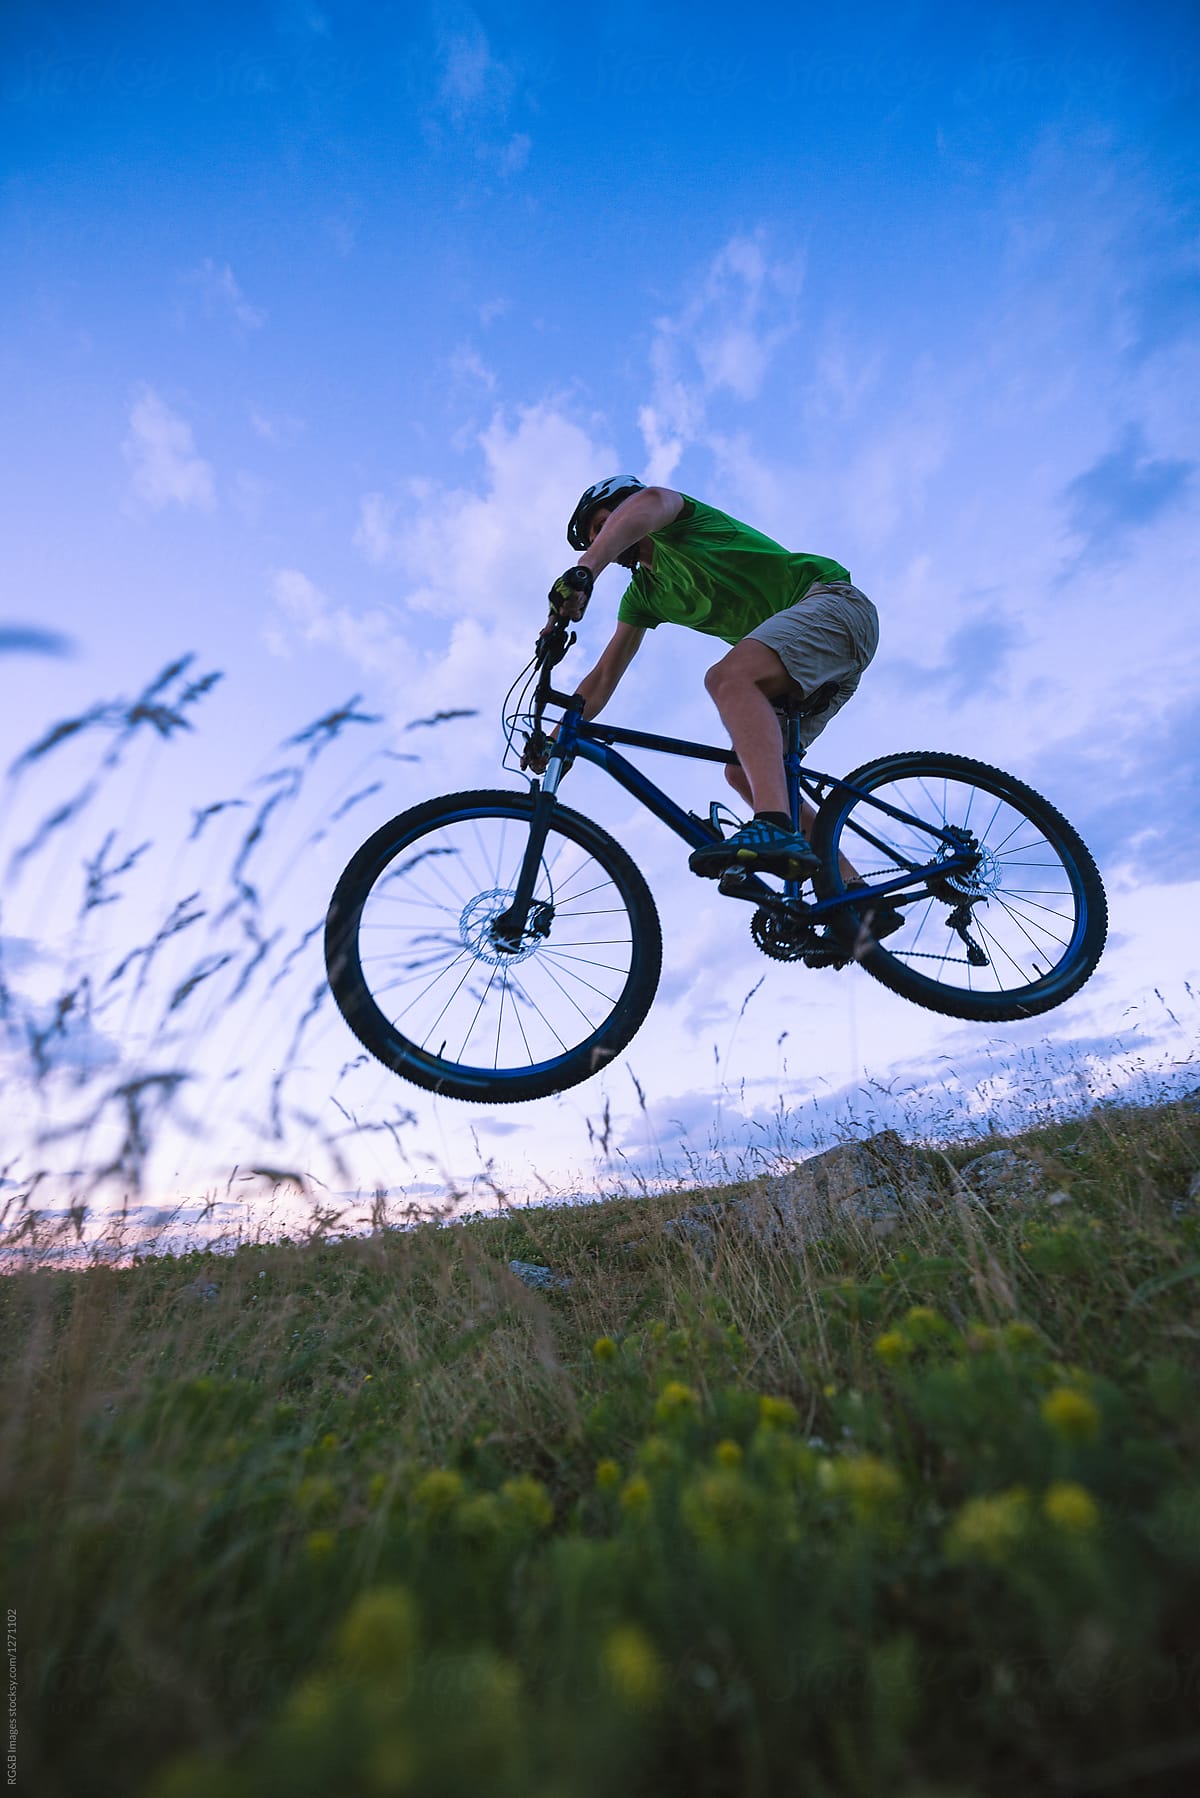 Caucasian man jumping with mountain bike off road